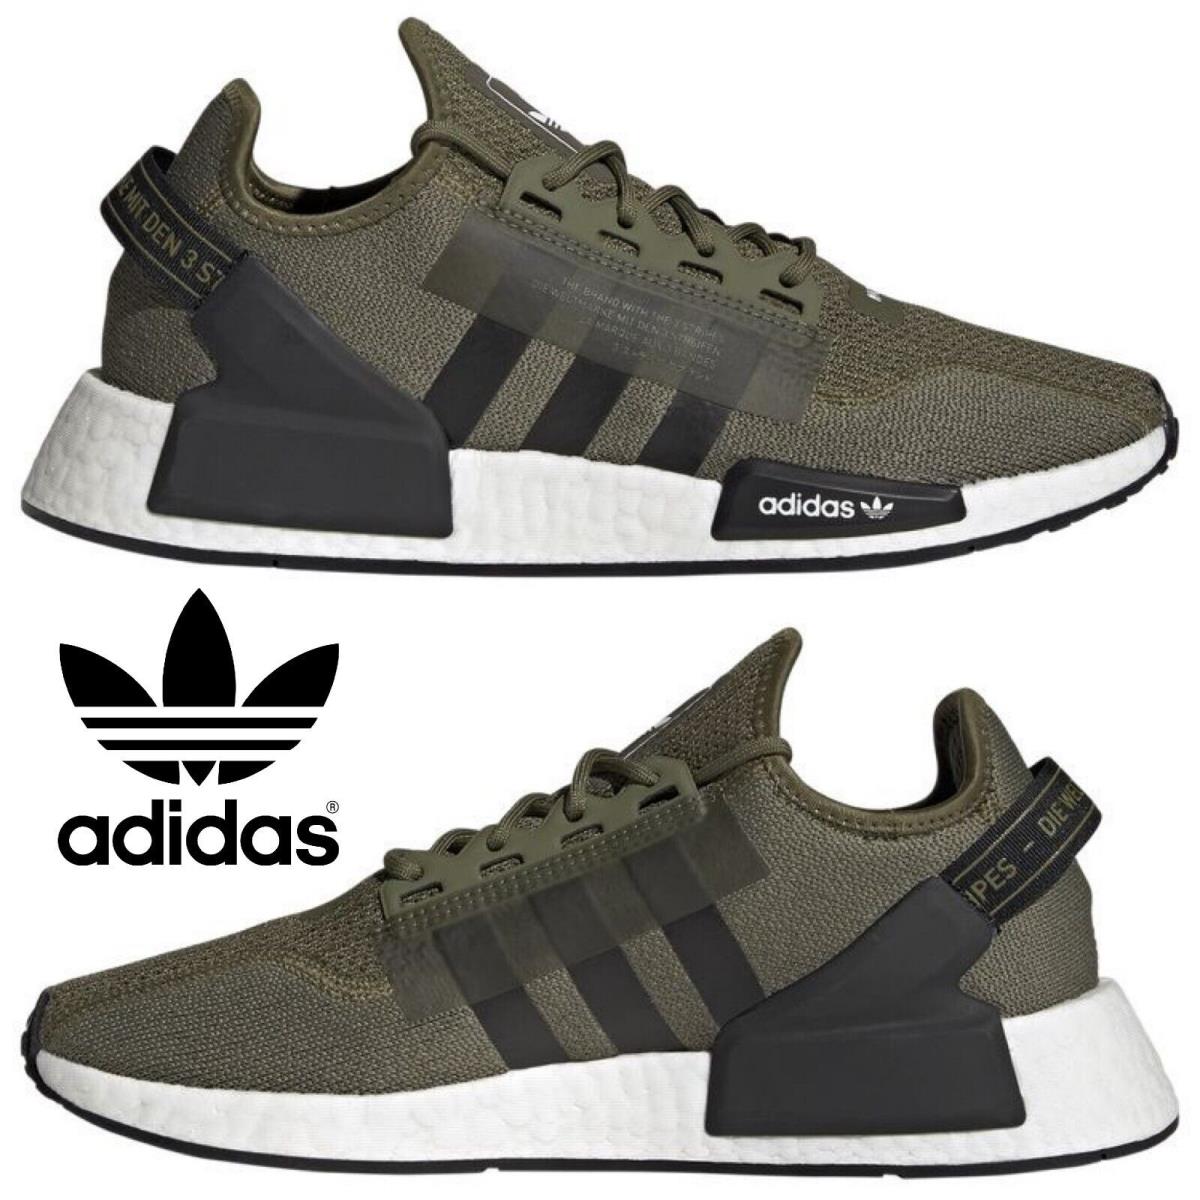 Adidas Originals Nmd R1 V2 Men`s Sneakers Running Shoes Gym Casual Sport Olive